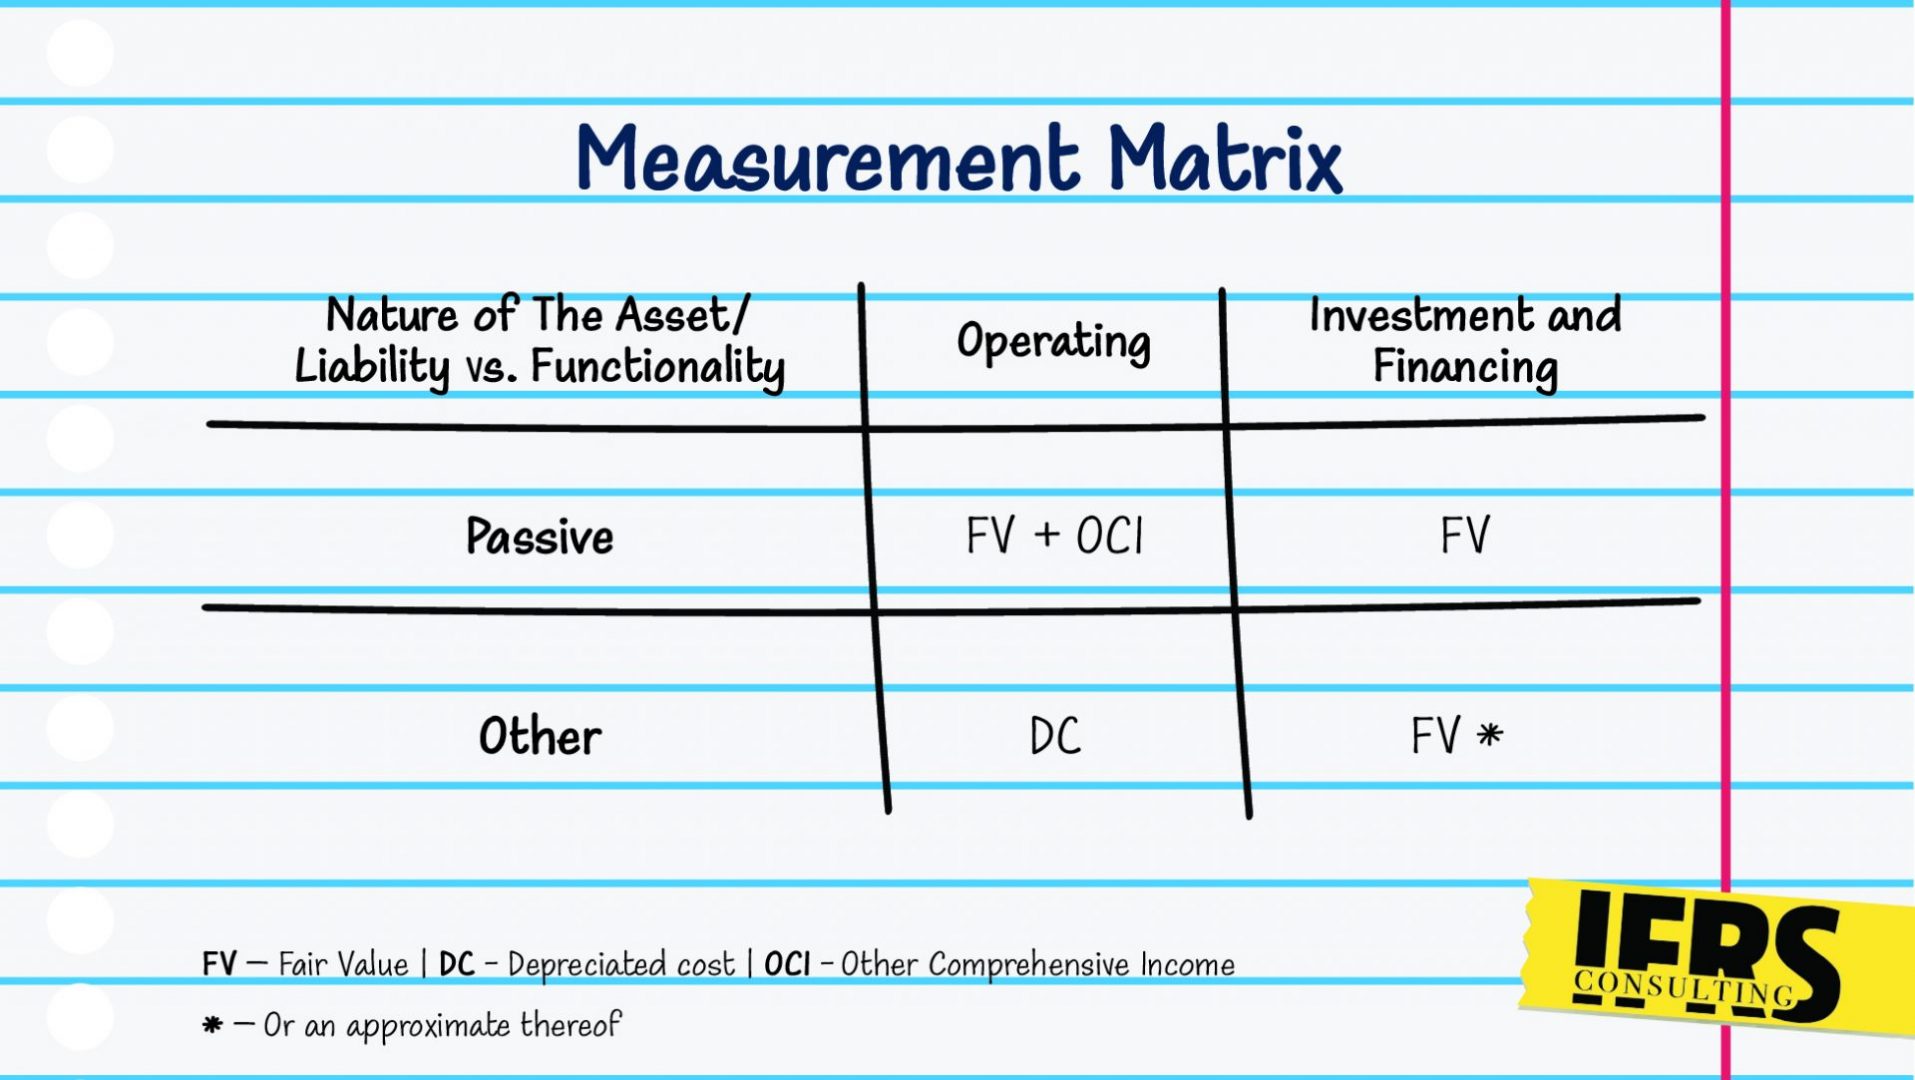 Measurement and Presentation in the Statement of Profit or Loss – It’s Time to Put Things in Order